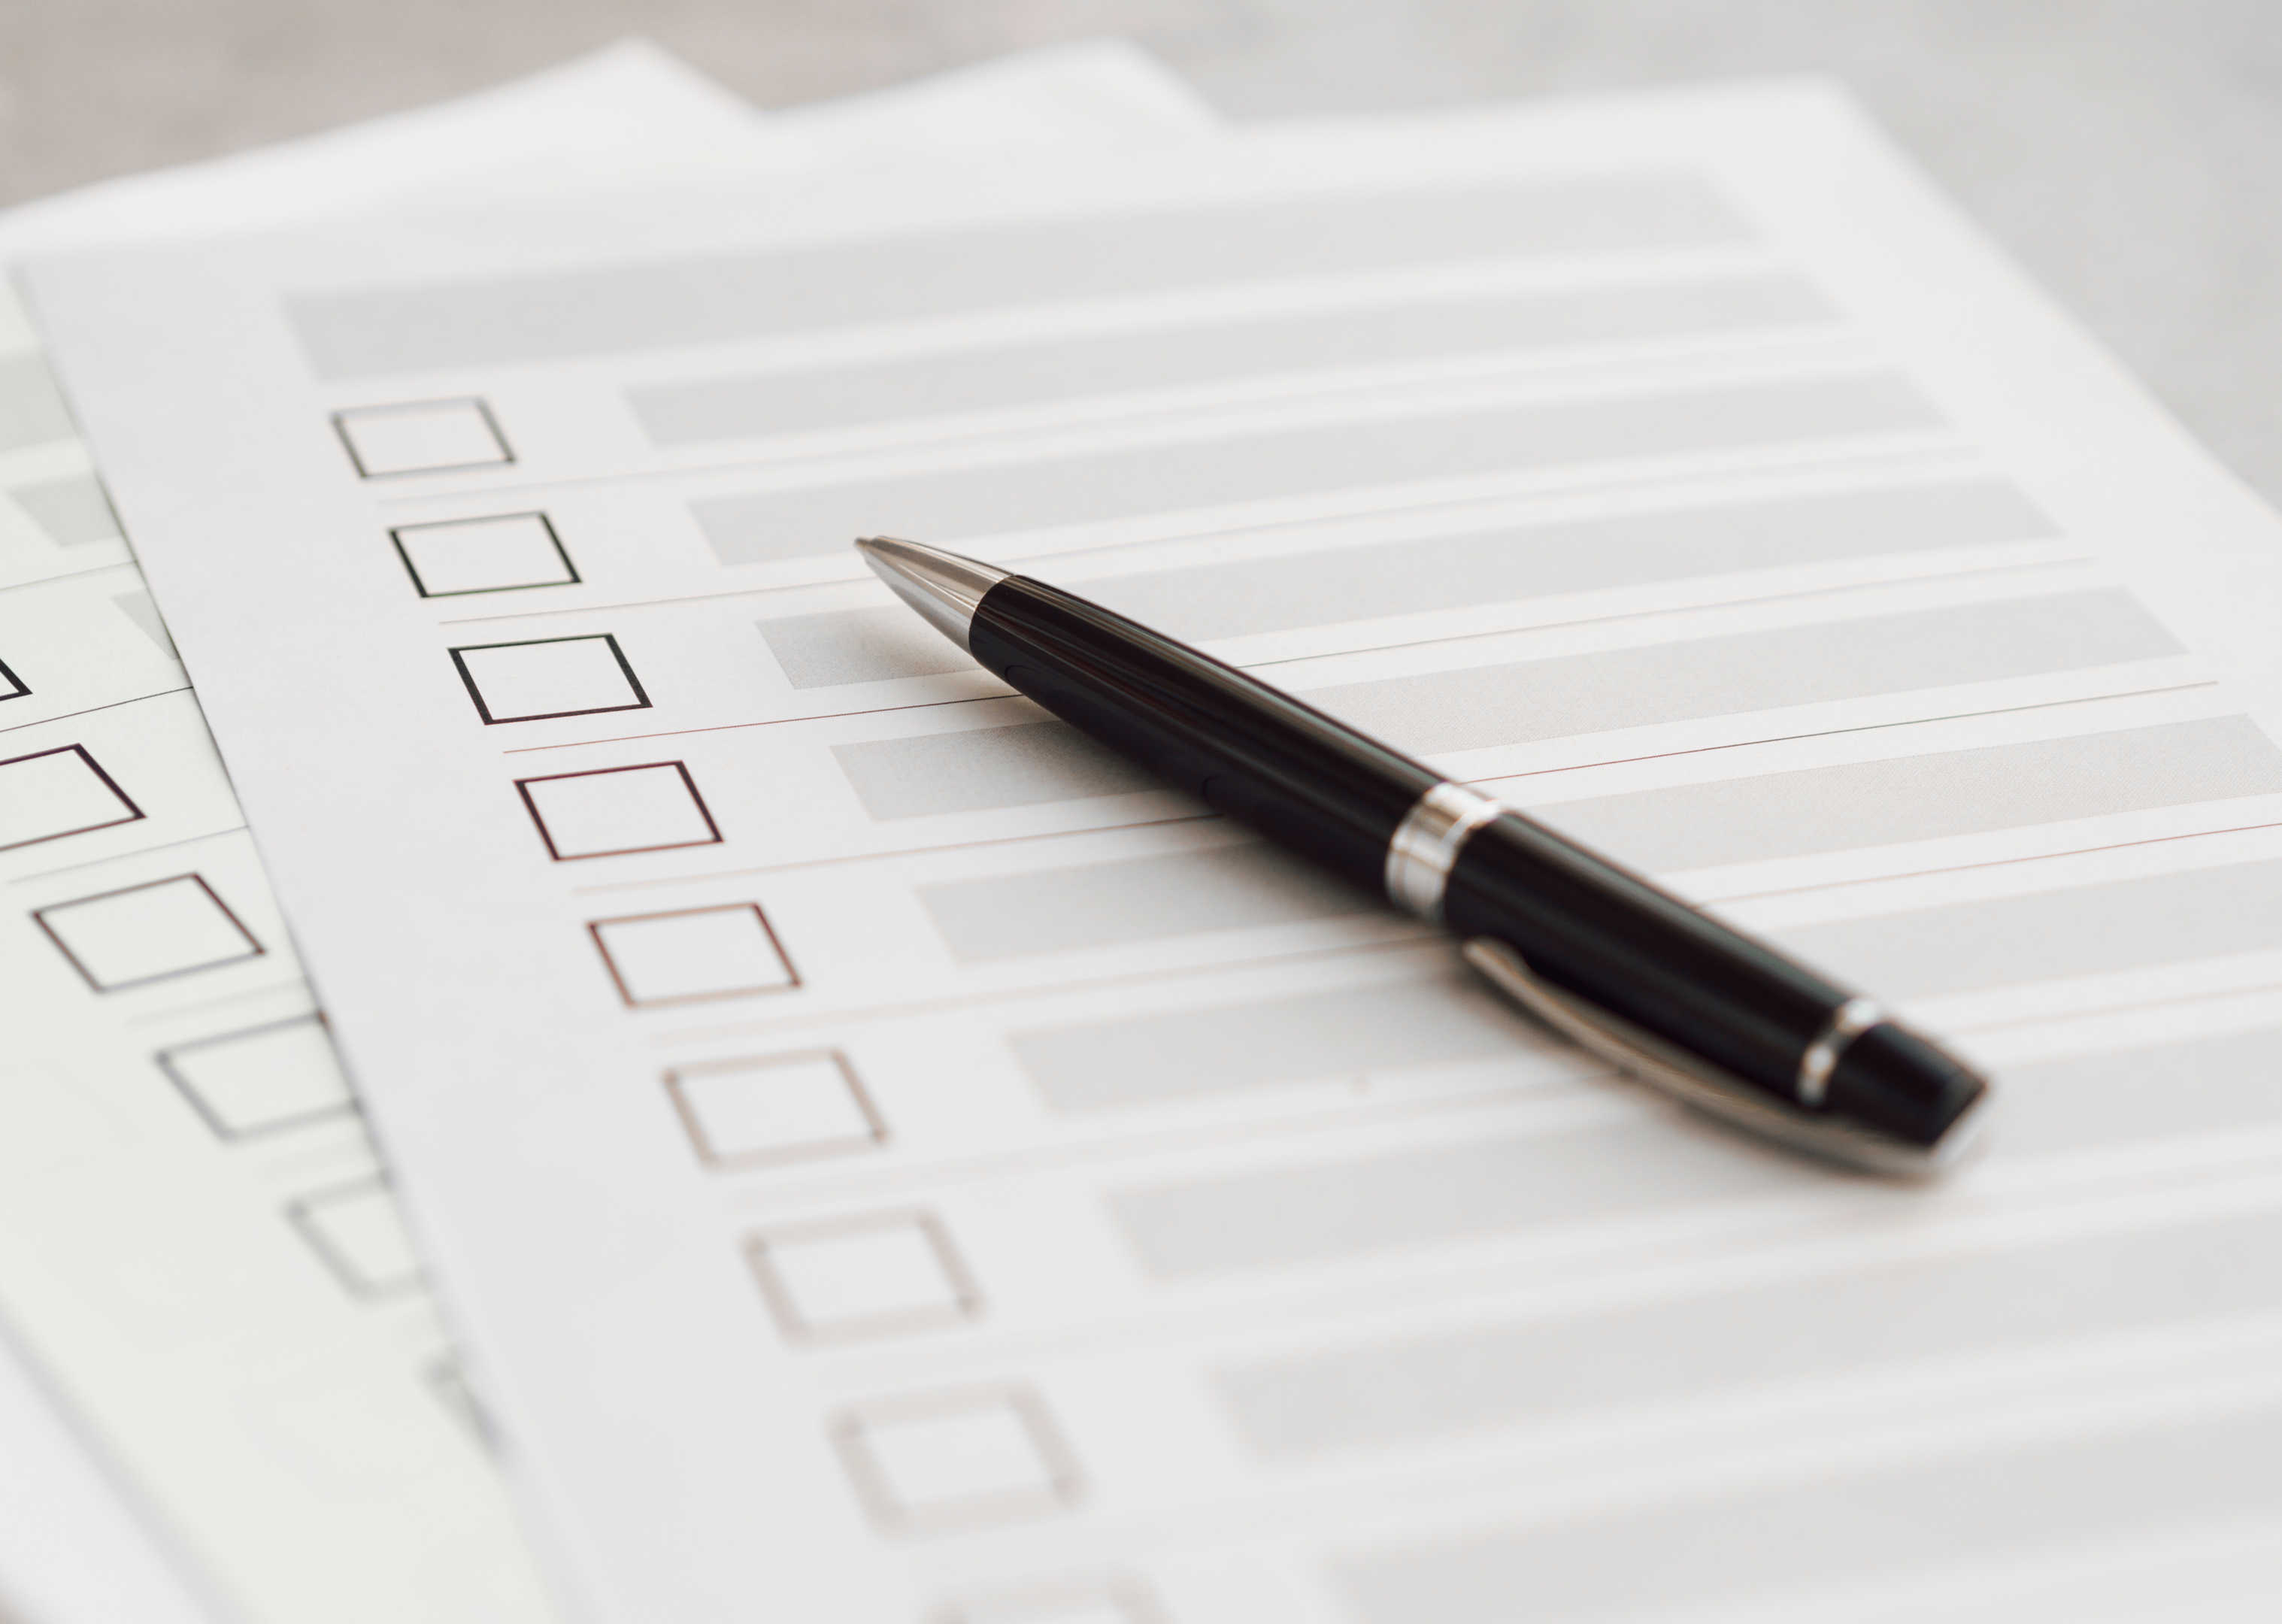 A structured questionnaire is a useful tool for getting information.